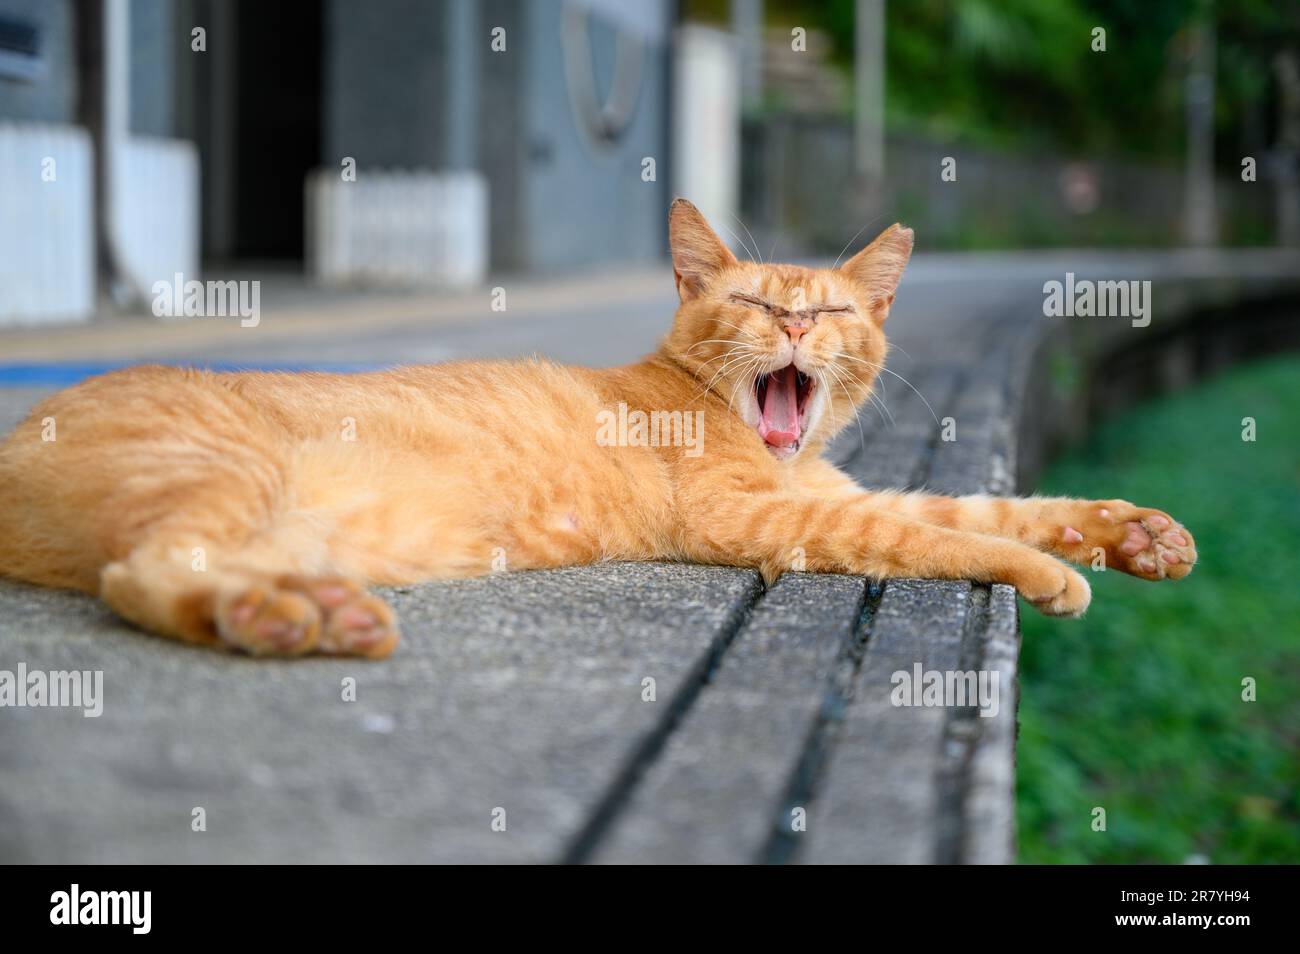 A yellow cat yawns lazily with its mouth wide open. The cat lay on the platform of the old railway station. Stock Photo